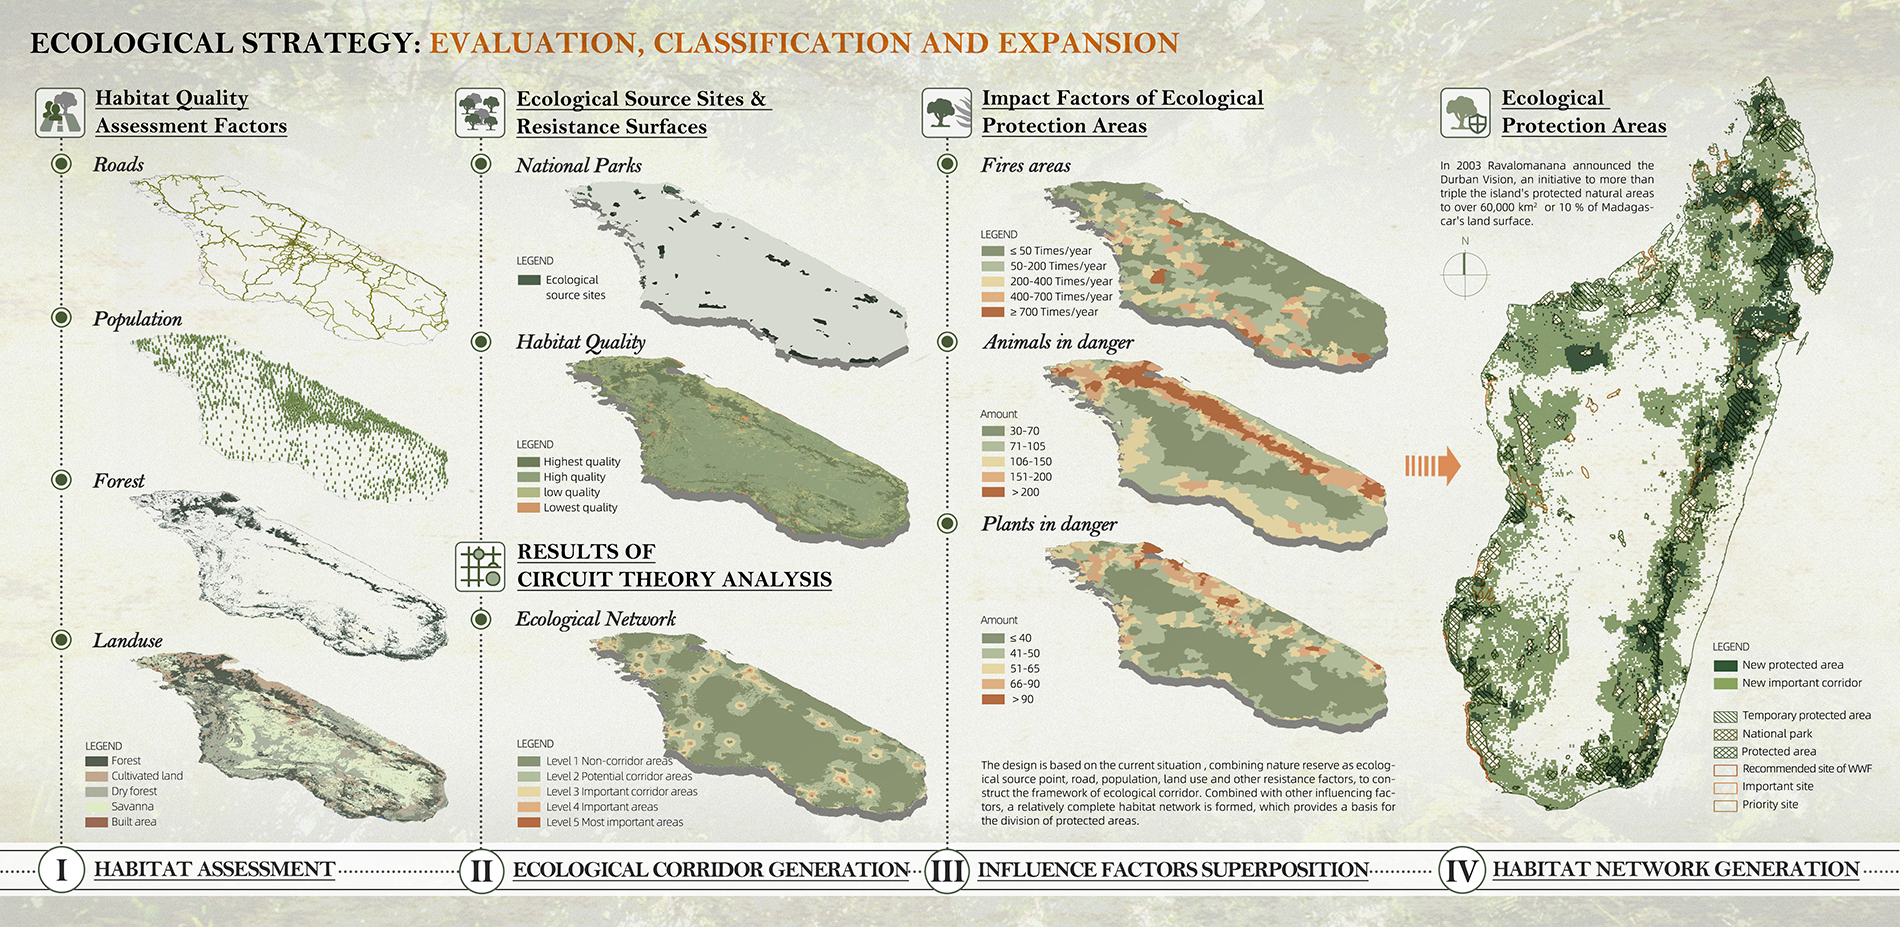 Ecological Strategy: Evaluation, Classification and Expansion